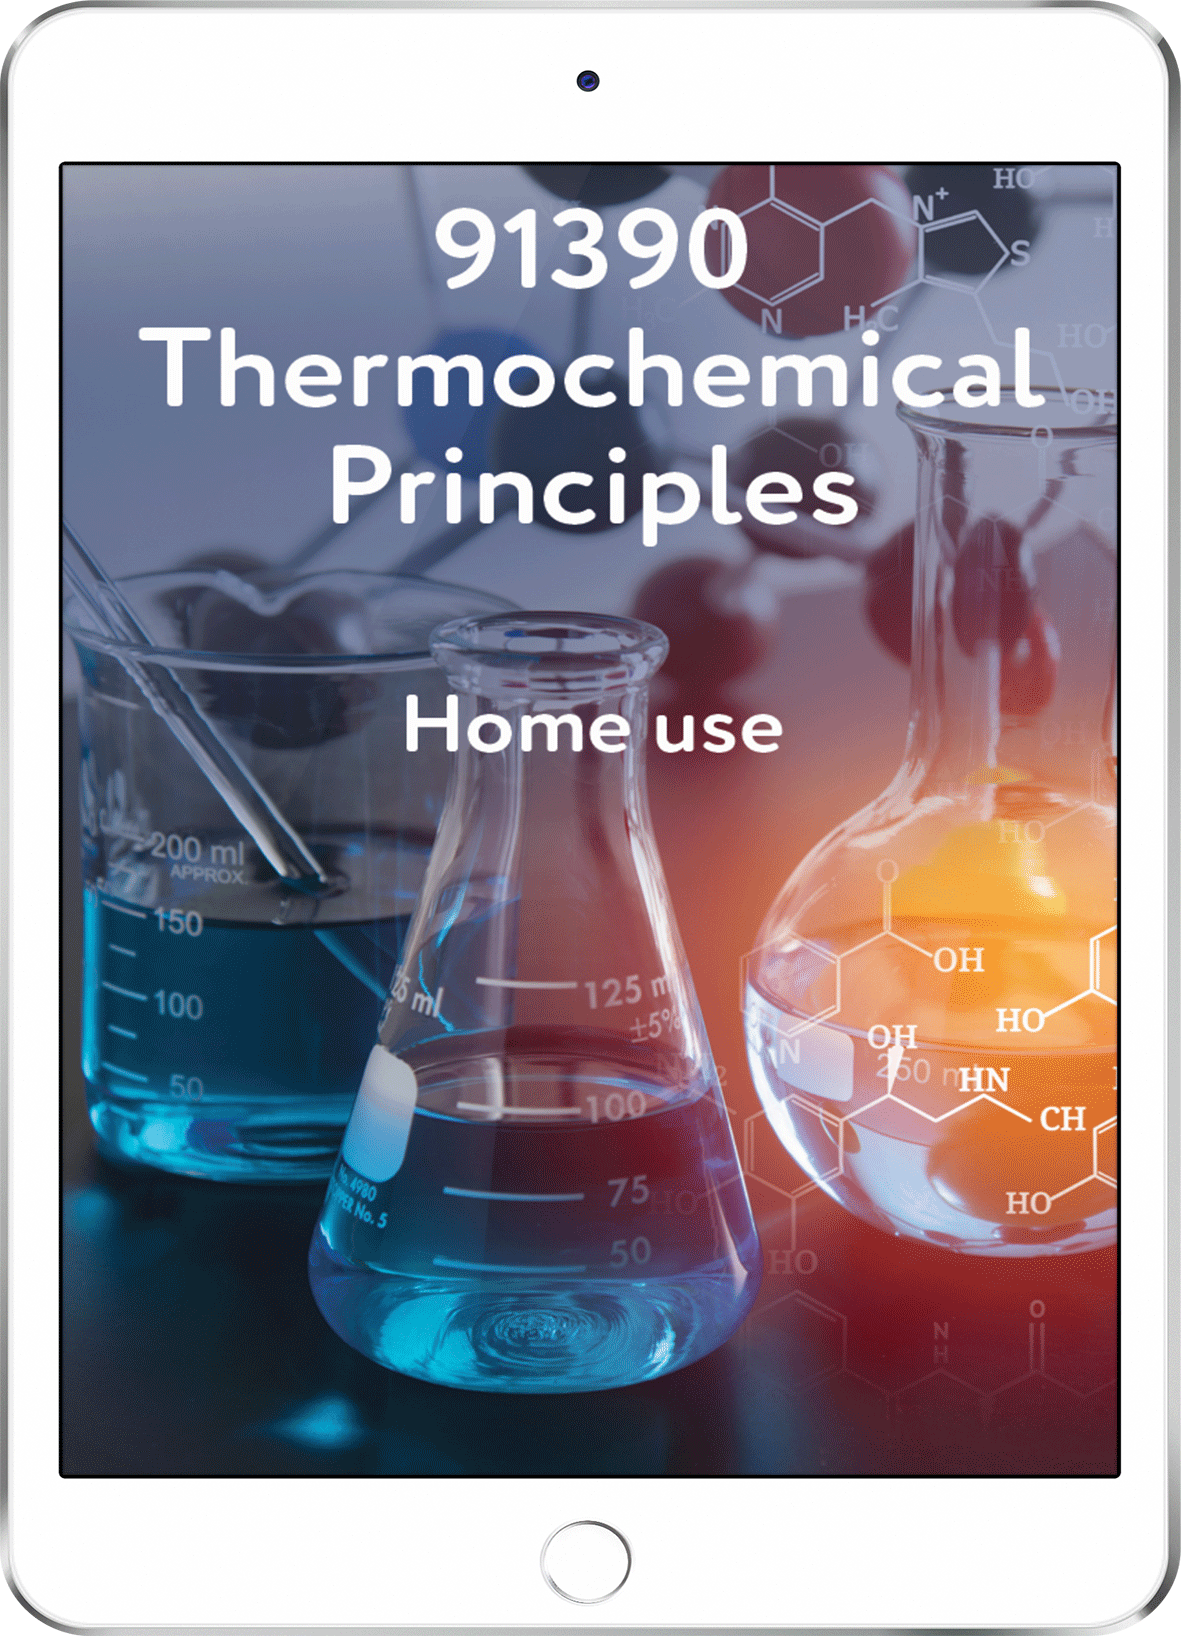 91390 Thermochemical Principles - Home Use